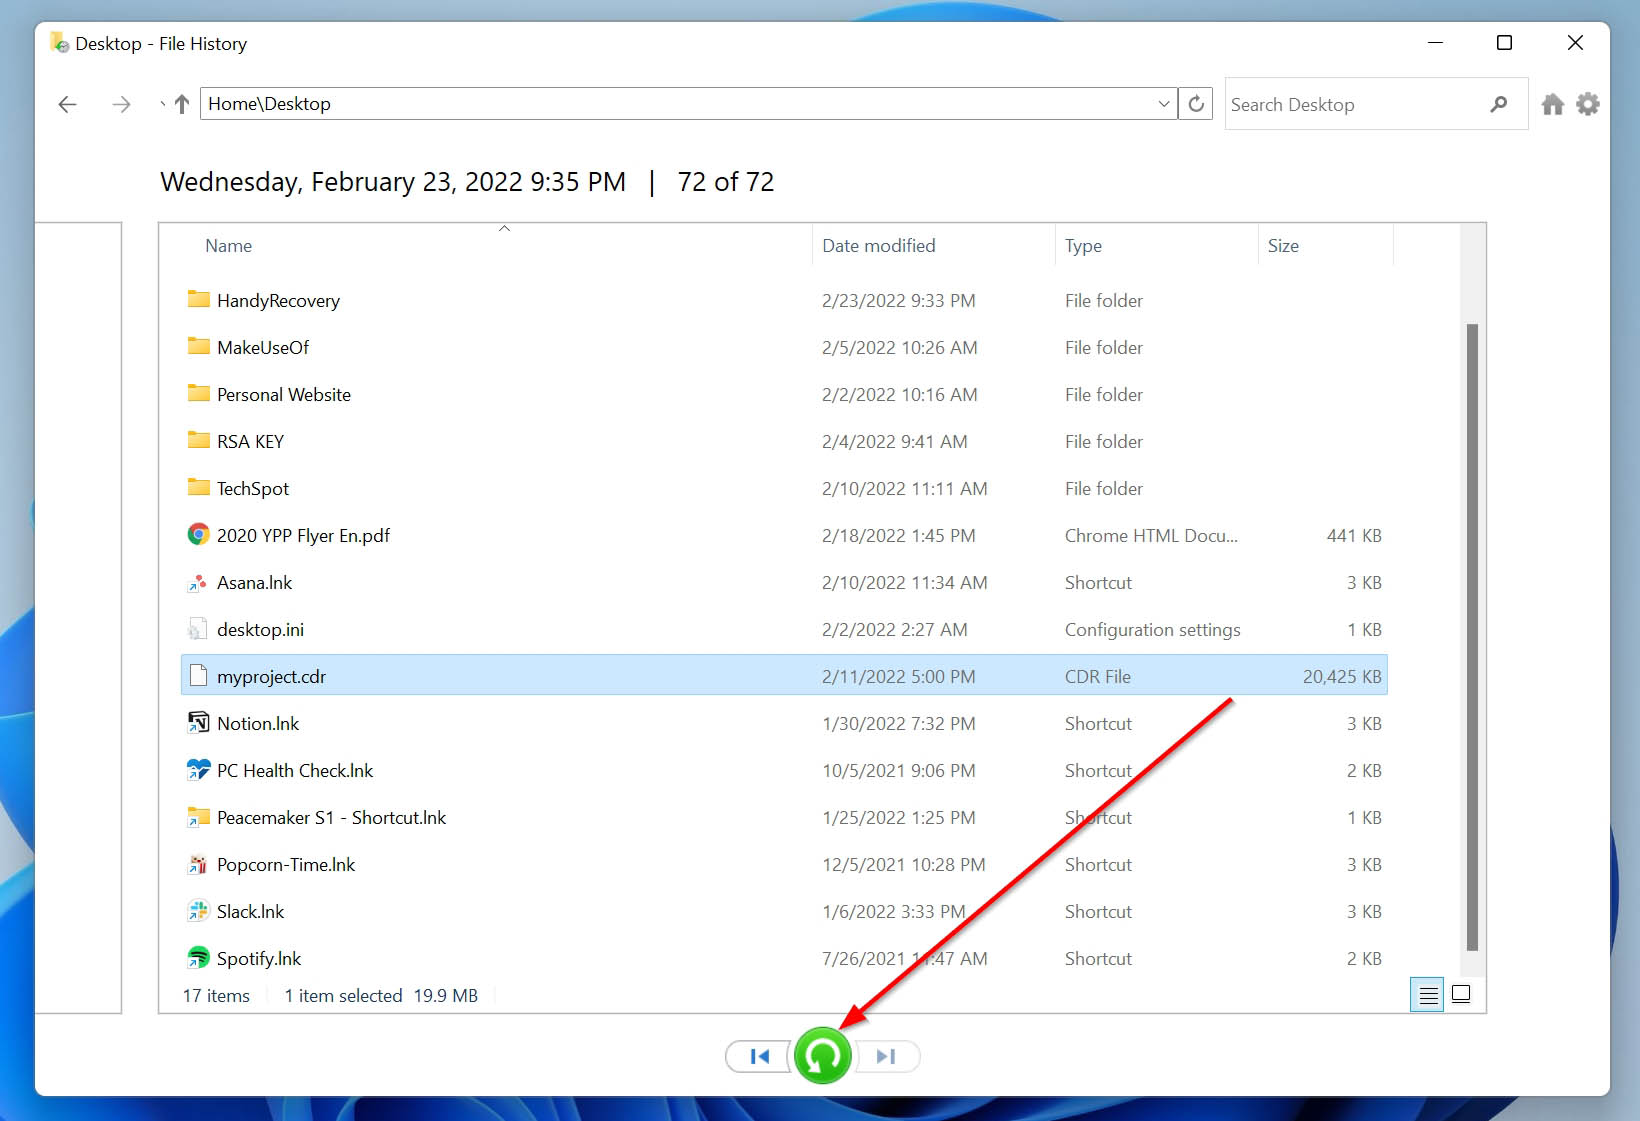 A CDR file in Windows File History.